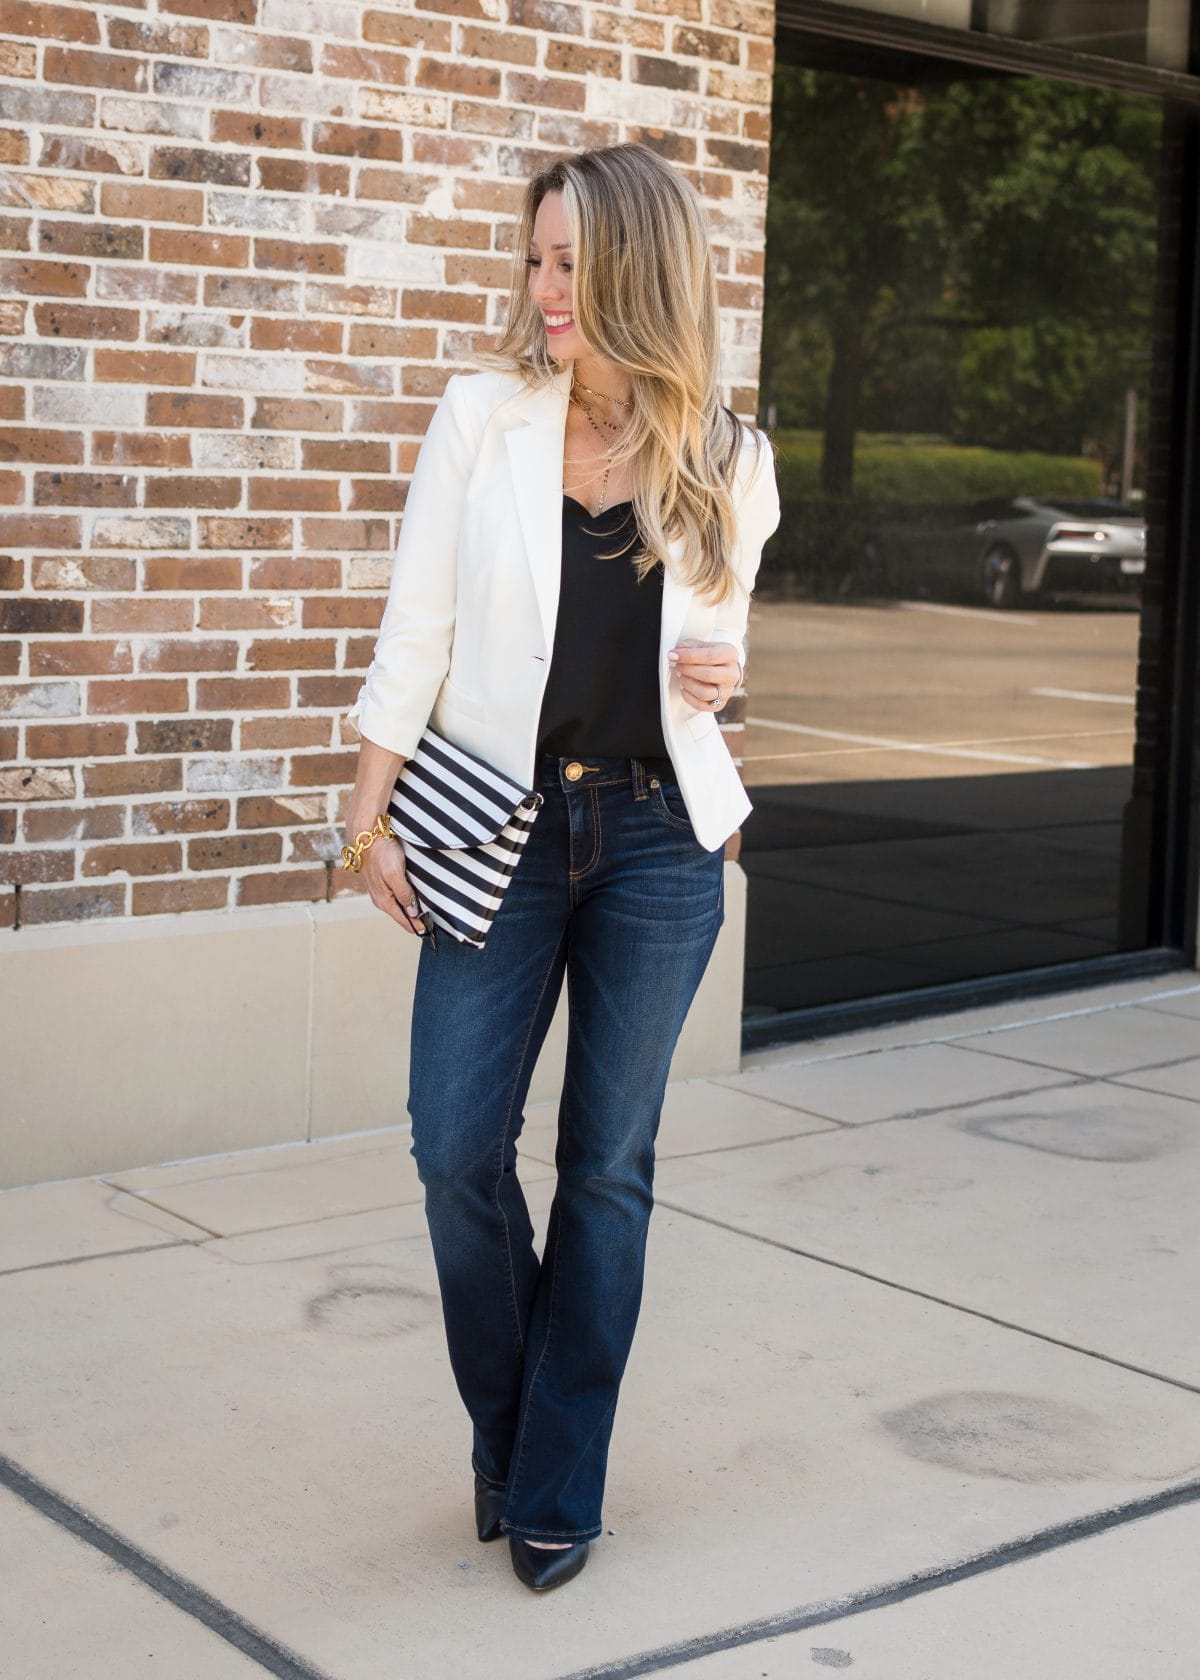 How To Style A Blazer With Jeans